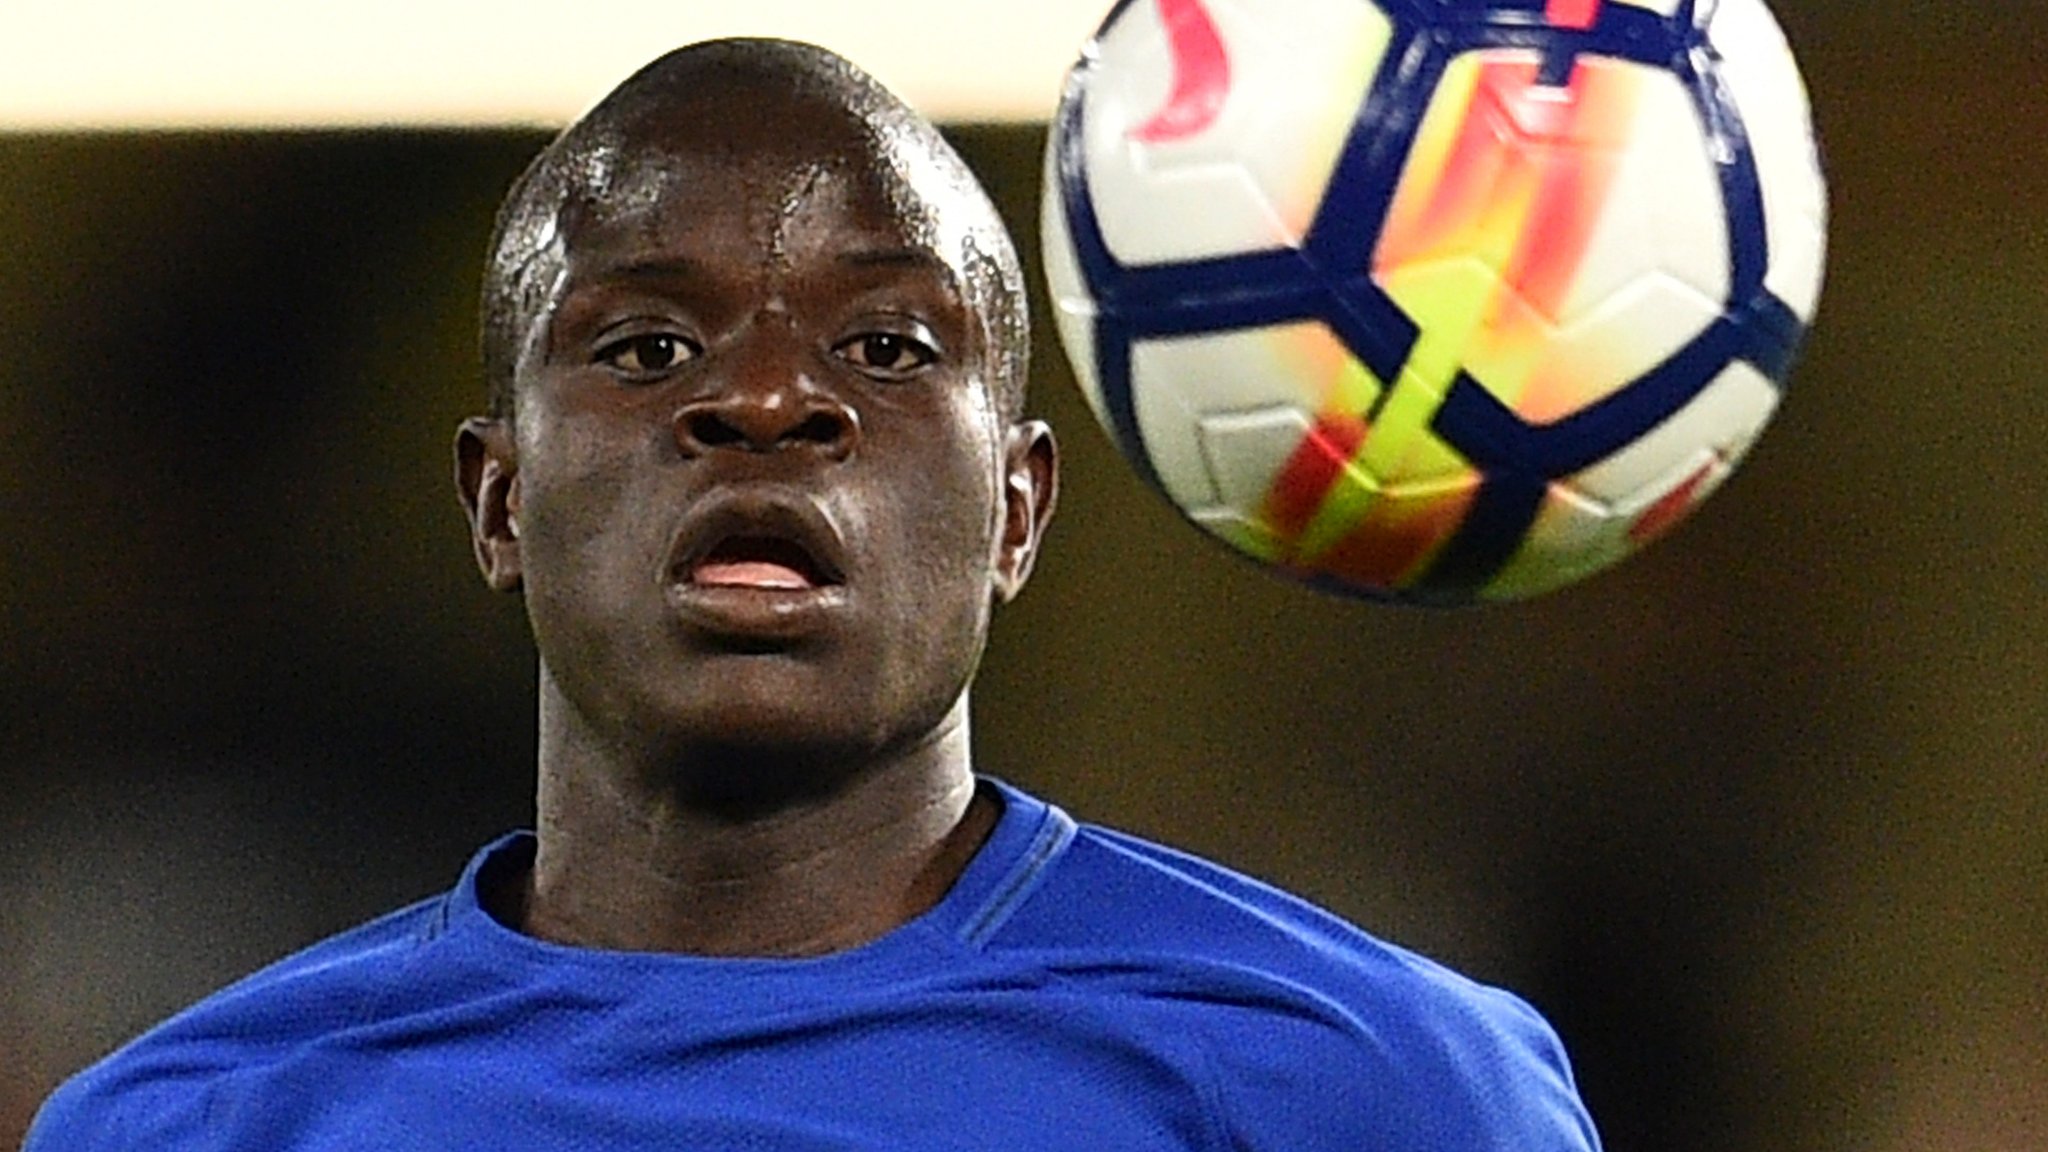 Barca offer player plus cash for Kante - Saturday's gossip